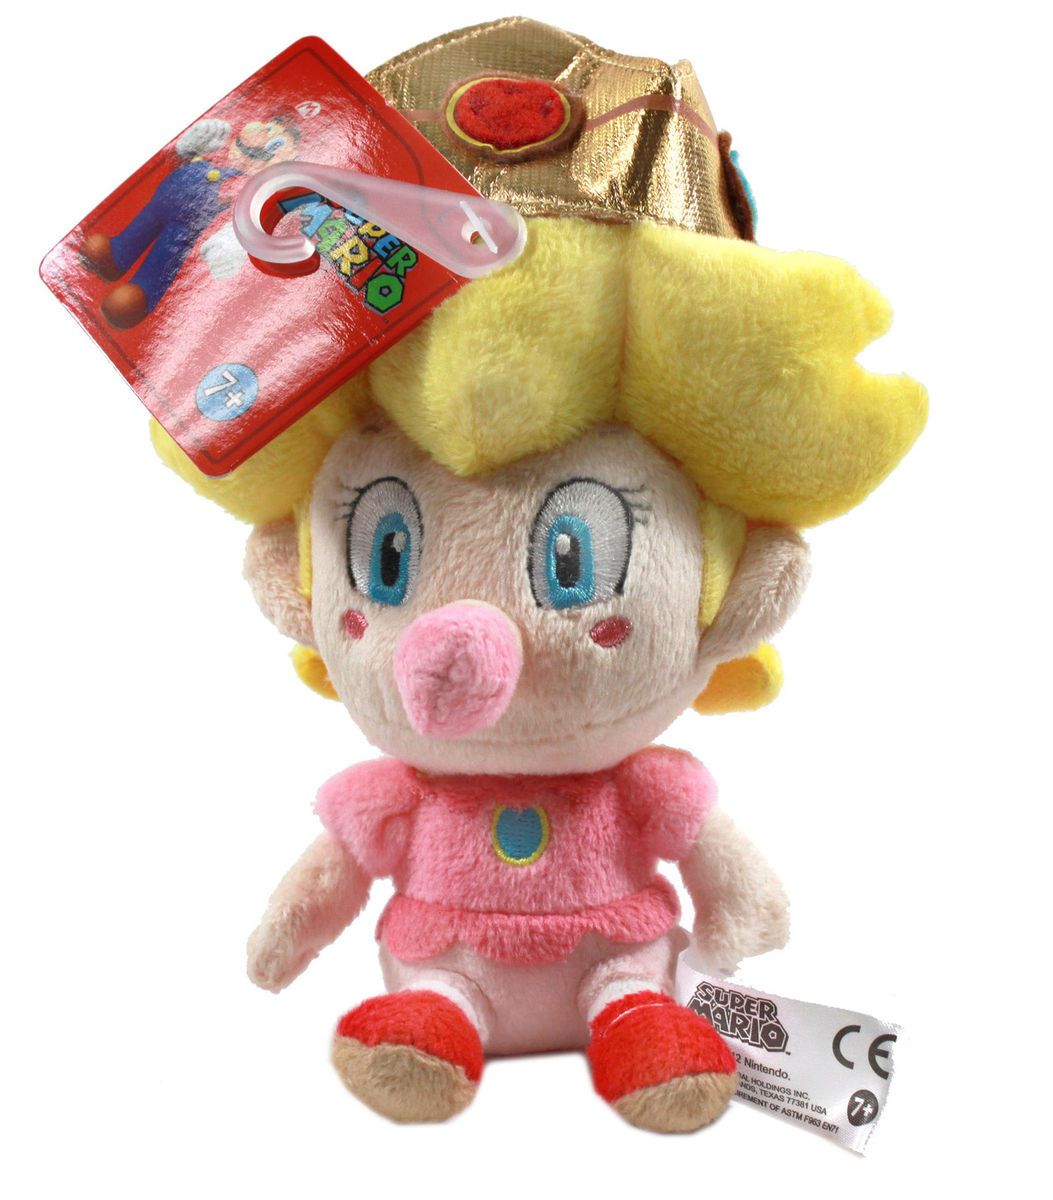 Authentic Brand New Global Holdings Super Mario Plush   5 Baby Peach